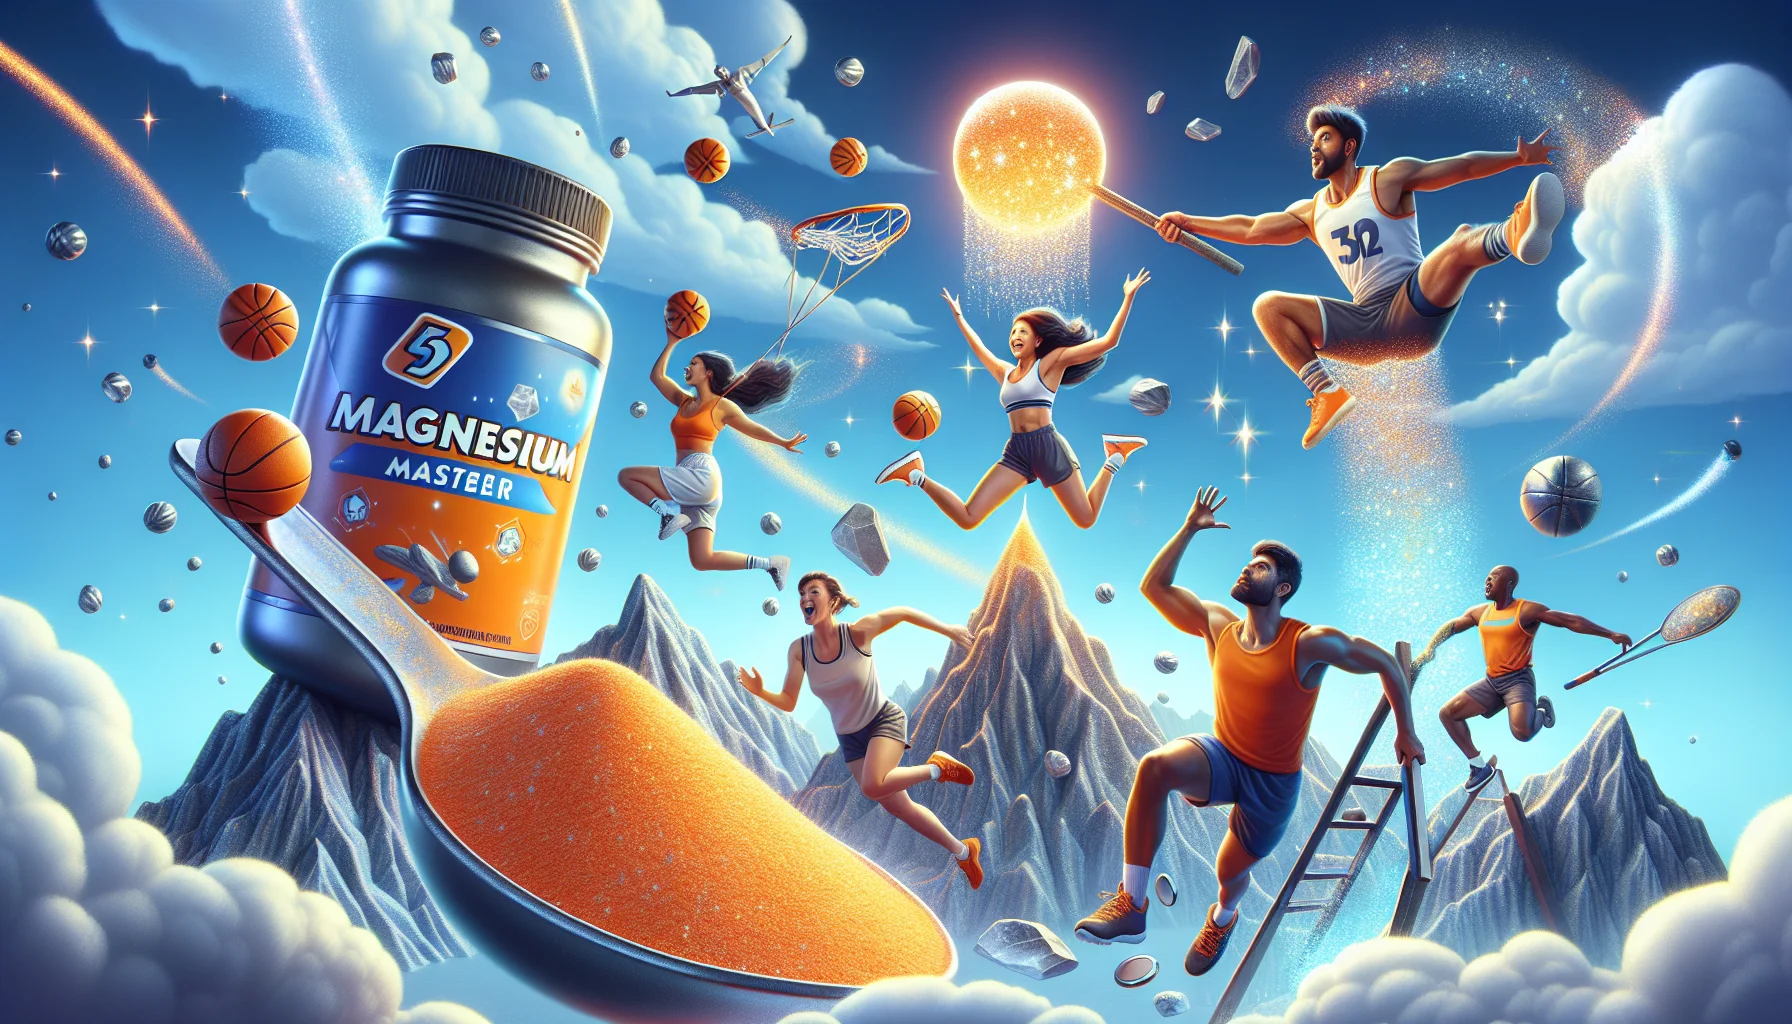 Create a vibrant and humorous scene centered around a hypothetical magnesium supplement called 'Magnesium Master 7'. This supplement is surrounded by energetic characters showing off their sporting prowess. You see a basketball player, a Hispanic man in his 30s, dunking an orange ball infused with magnesium sparkle. Next, a South Asian female sprinter, glowing with magnesium magic, hurdles a supplement bottle with outstanding speed. Lastly, there's a white male rock climber, ascending a mountain shaped like a heaping spoonful of the supplement's powder. The sky is filled with shimmering magnesium particles, adding a surreal touch to the scene.